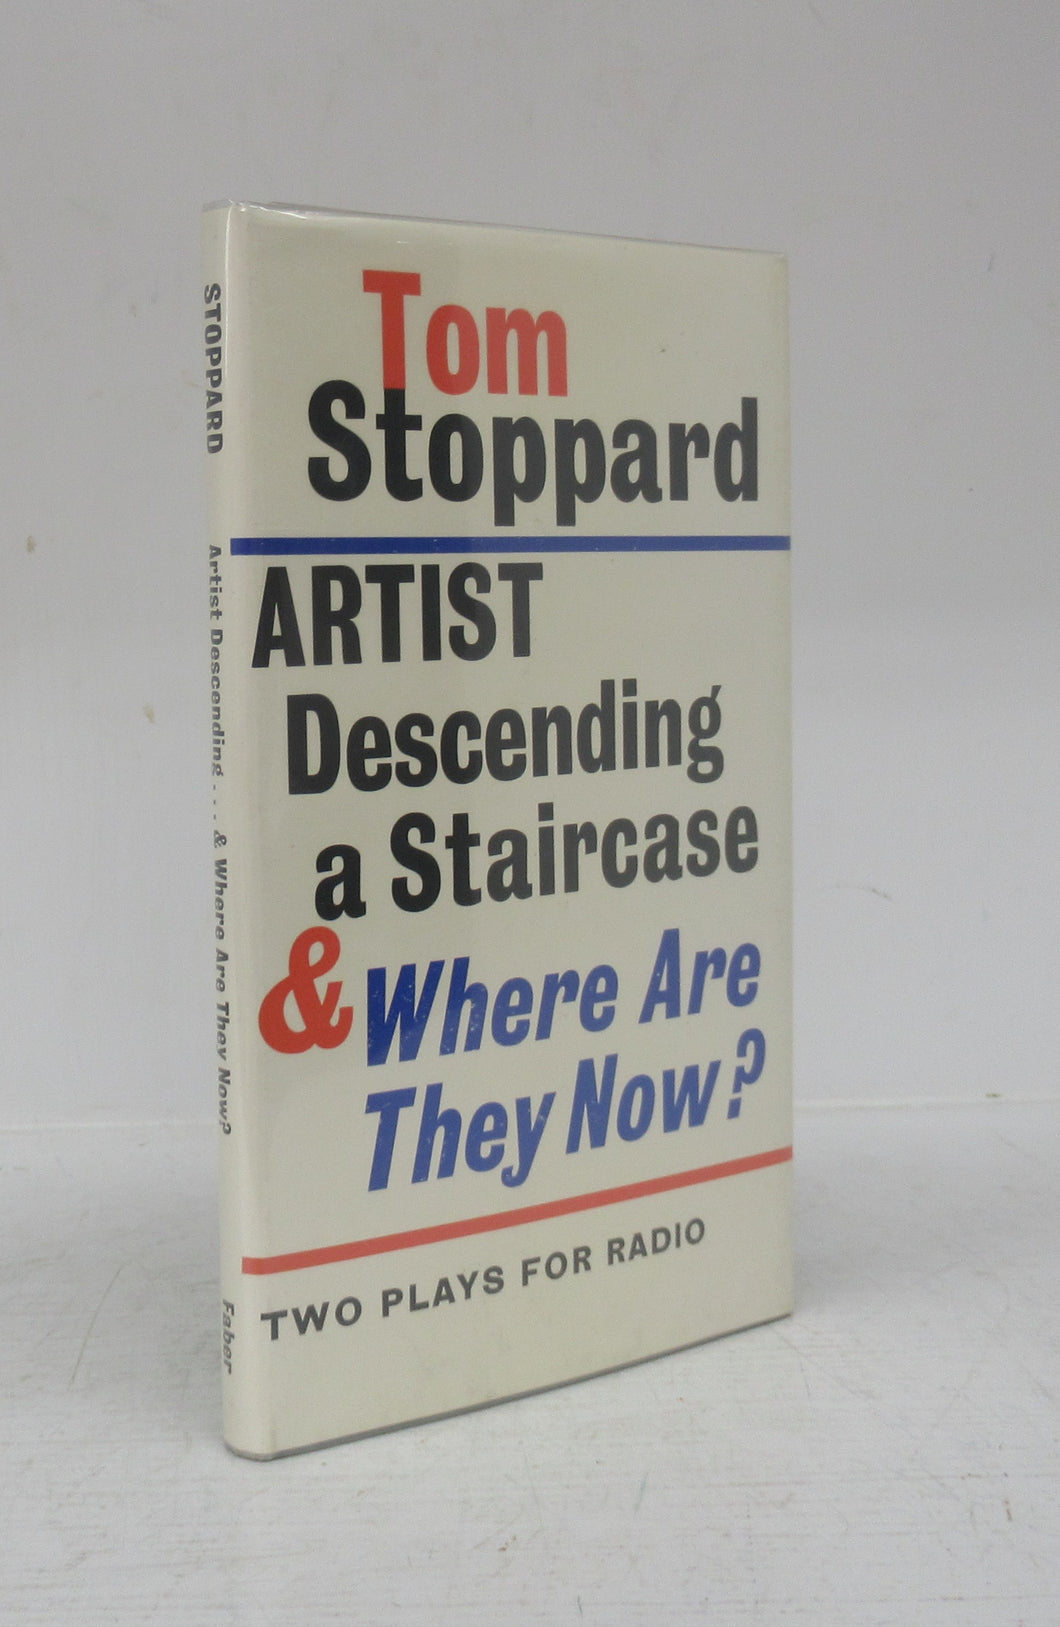 Artist Descending a Staircase & Where Are They Now? Two Plays For Radio